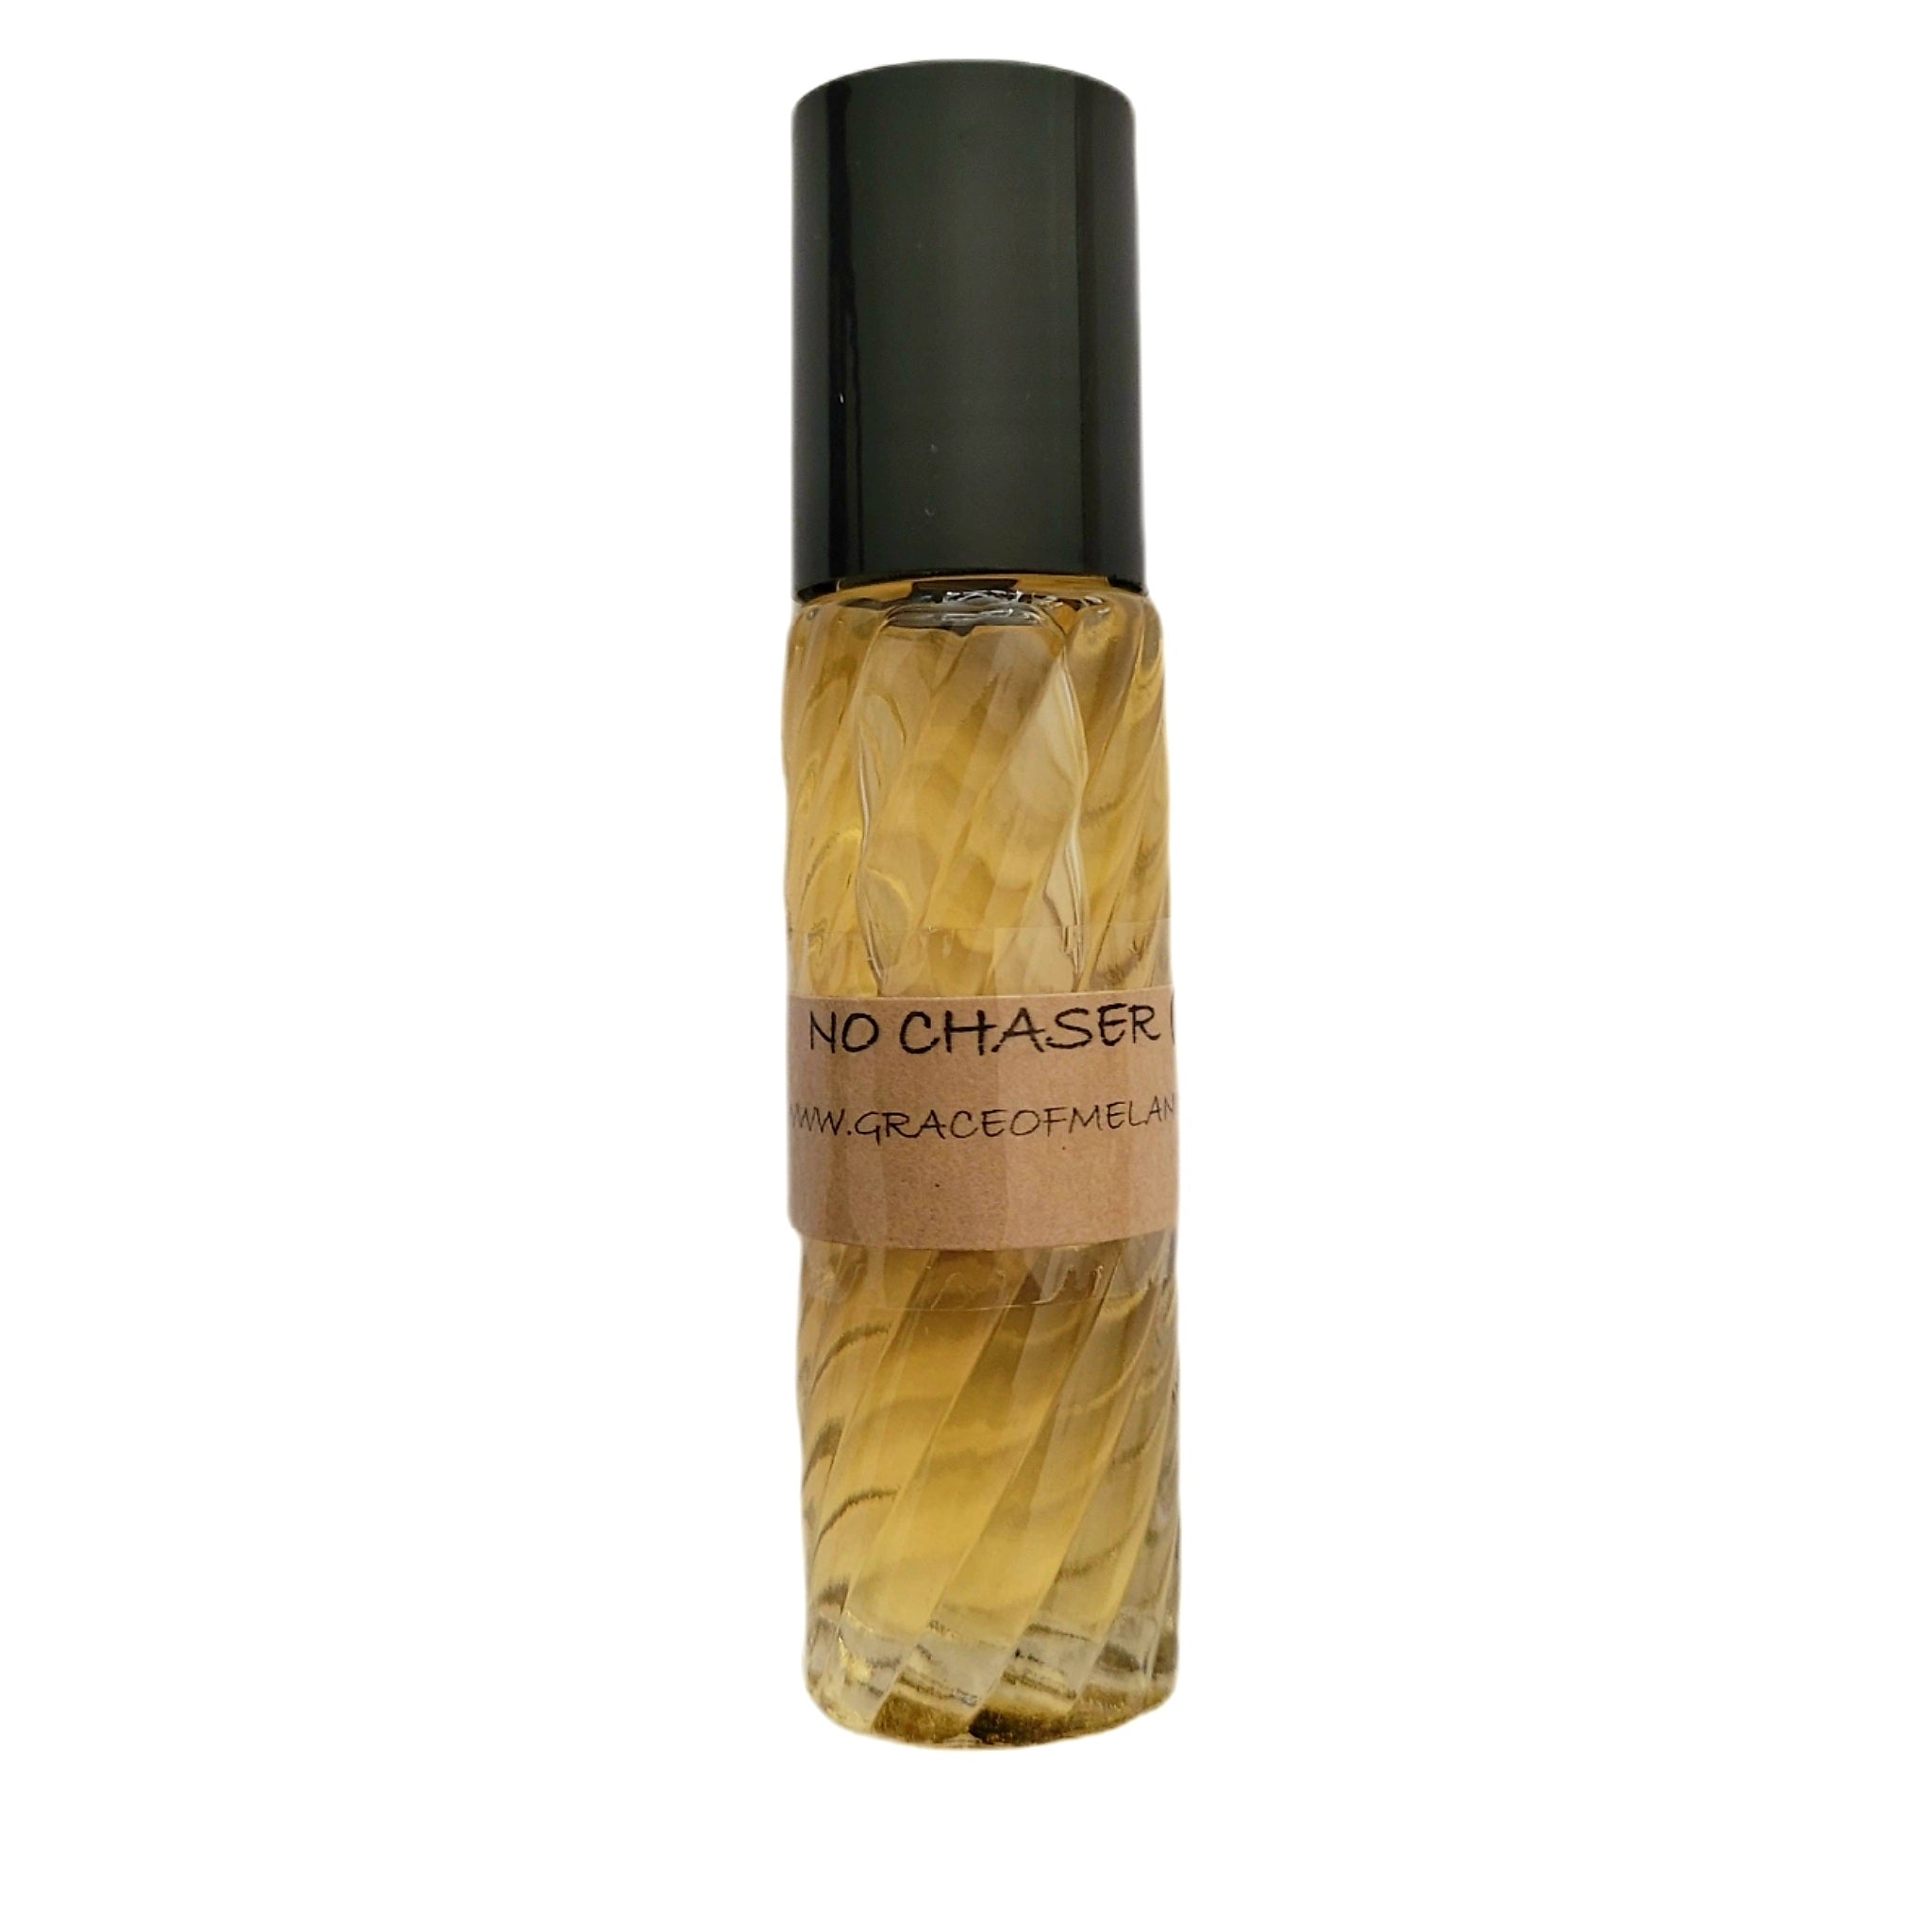 Perfume Oil - Our Impression Of LV Ombre Nomade Type, 100% Pure Uncut Body  Oil Our Interpretation, Perfume Body Oil, Scented Fragrance Size